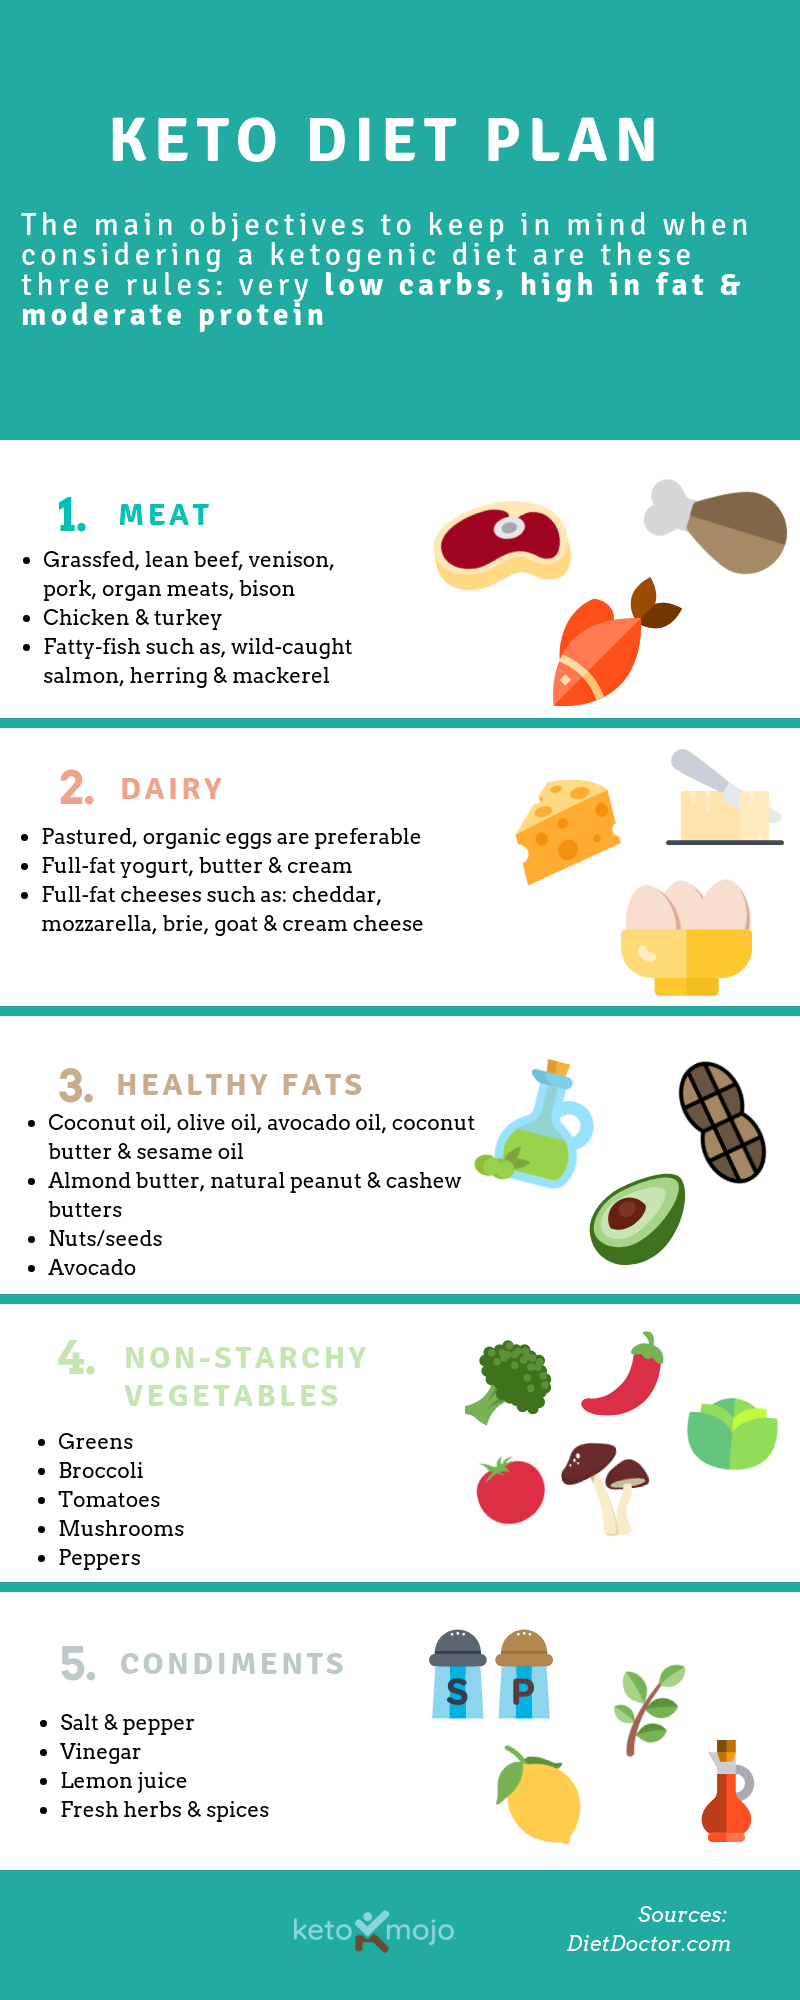 Keto Diet: What Is A Ketogenic Diet? - Webmd